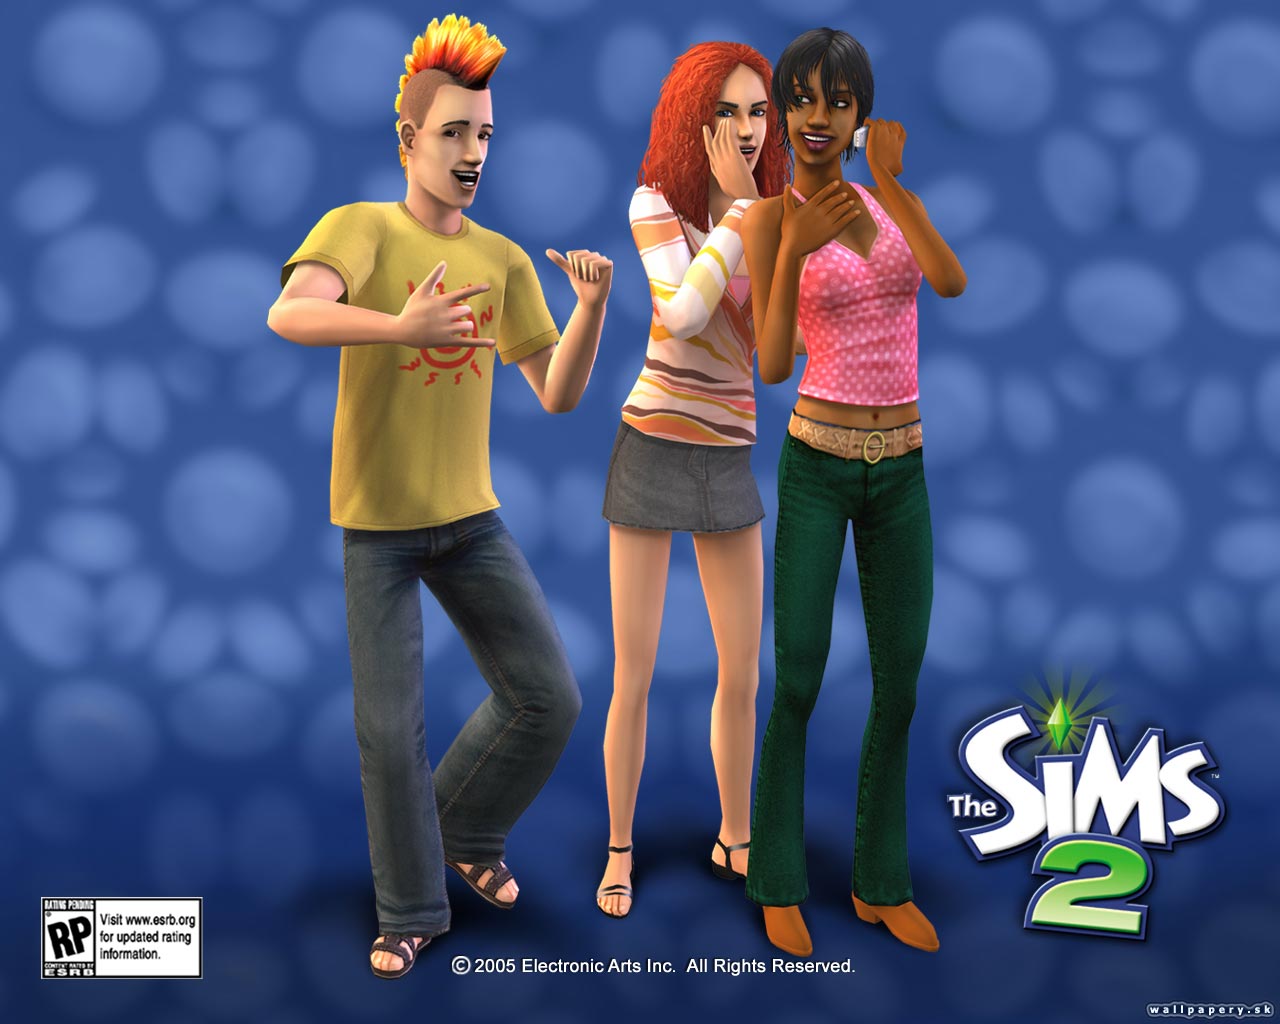 The Sims 2 - wallpaper 27